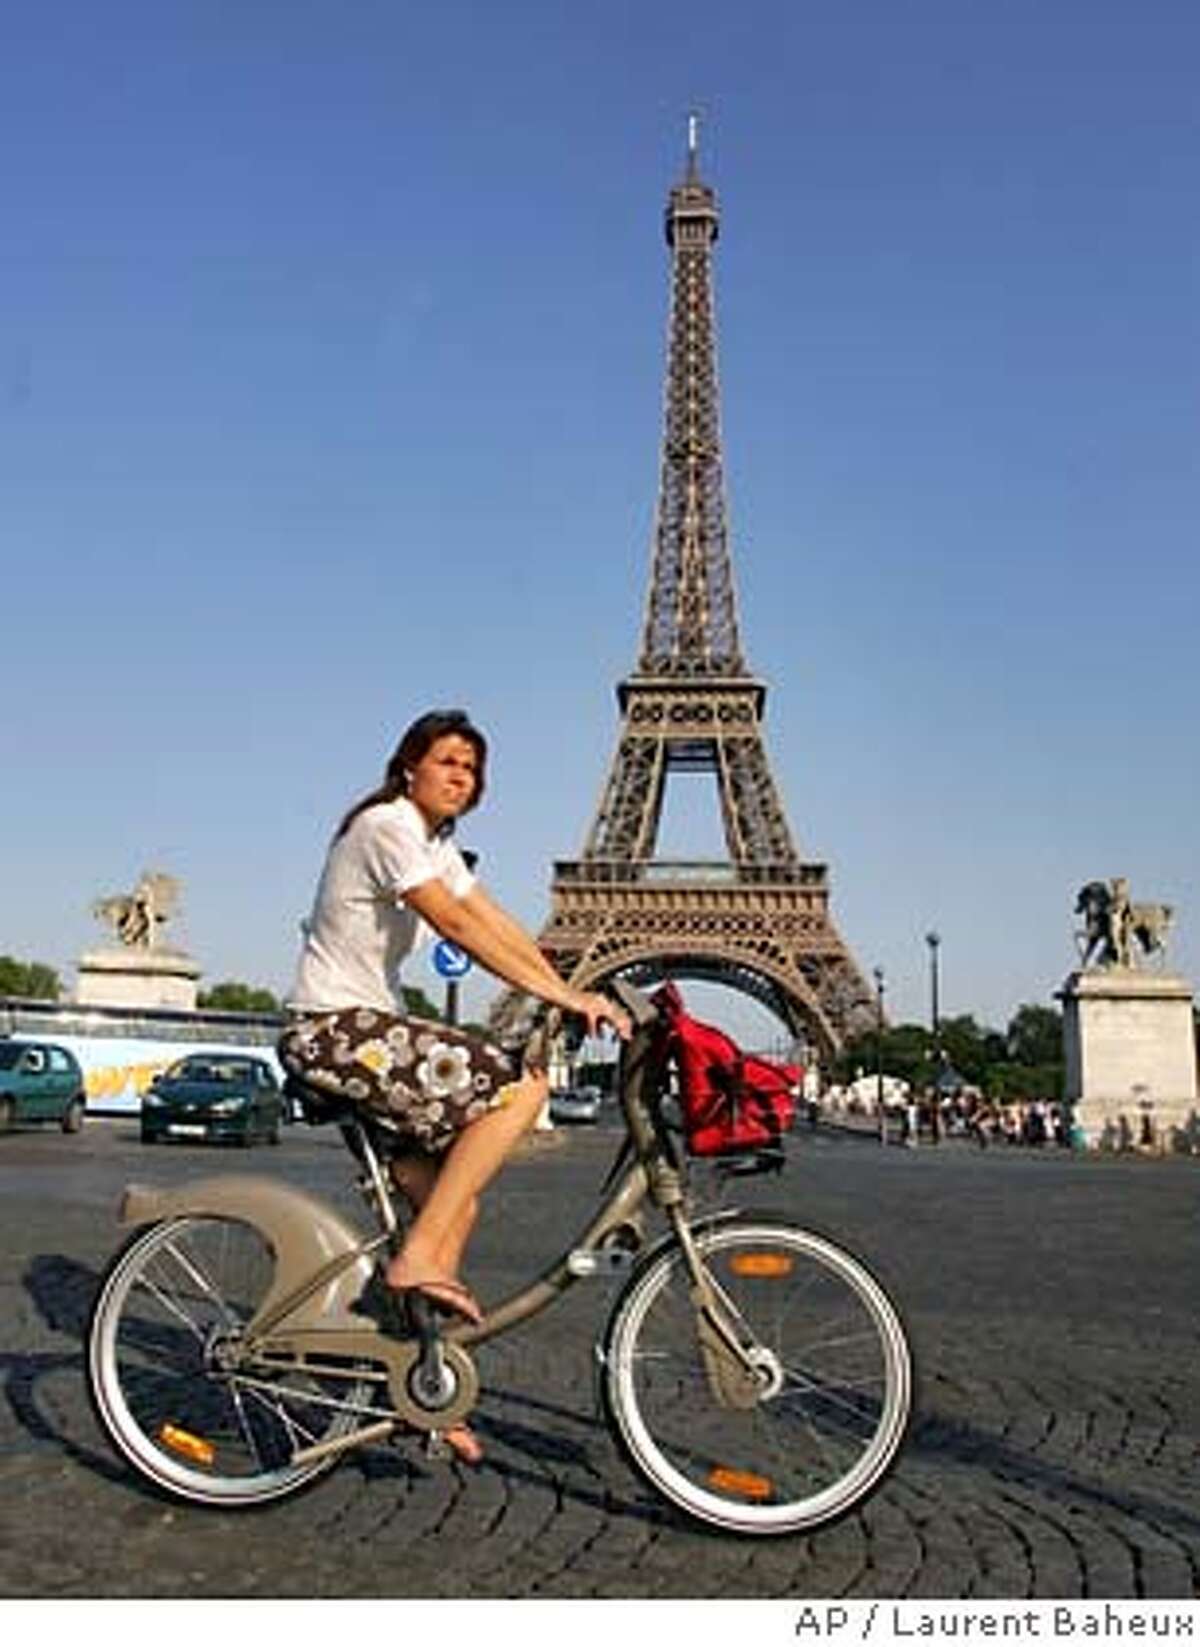 A rider uses a new bicycle provided by Paris City Hall, around the Eiffel Tower in Paris, Sunday, July 15, 2007. Paris City Hall launched a new bicycle service Sunday, with more than 10,600 posted at 750 stations all over the city and prices starting at a euro (US$1.36) for a one-day pass. Users can take a bike and put it back at any station around town. (AP Photo/Laurent Baheux)